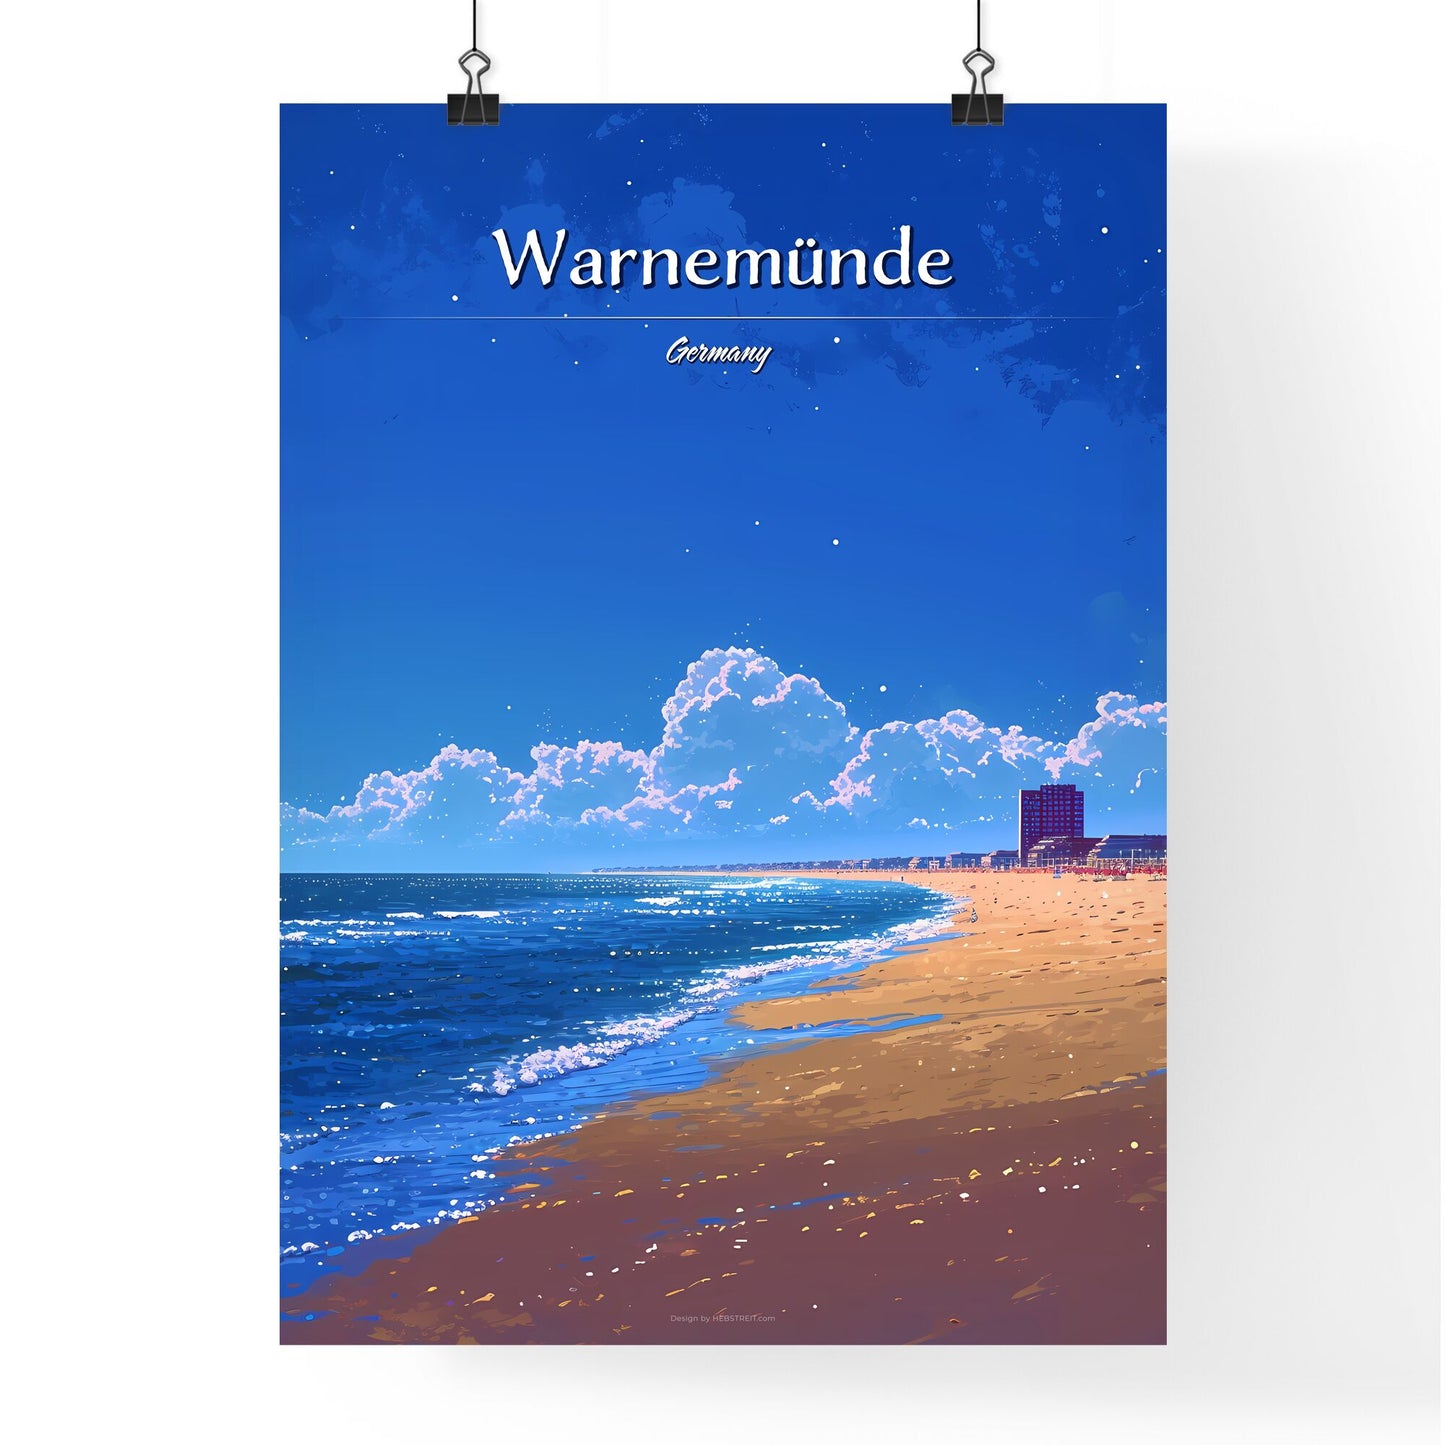 Warnemünde Beach, Germany (Baltic Sea) - Art print of a beach with buildings and water Default Title